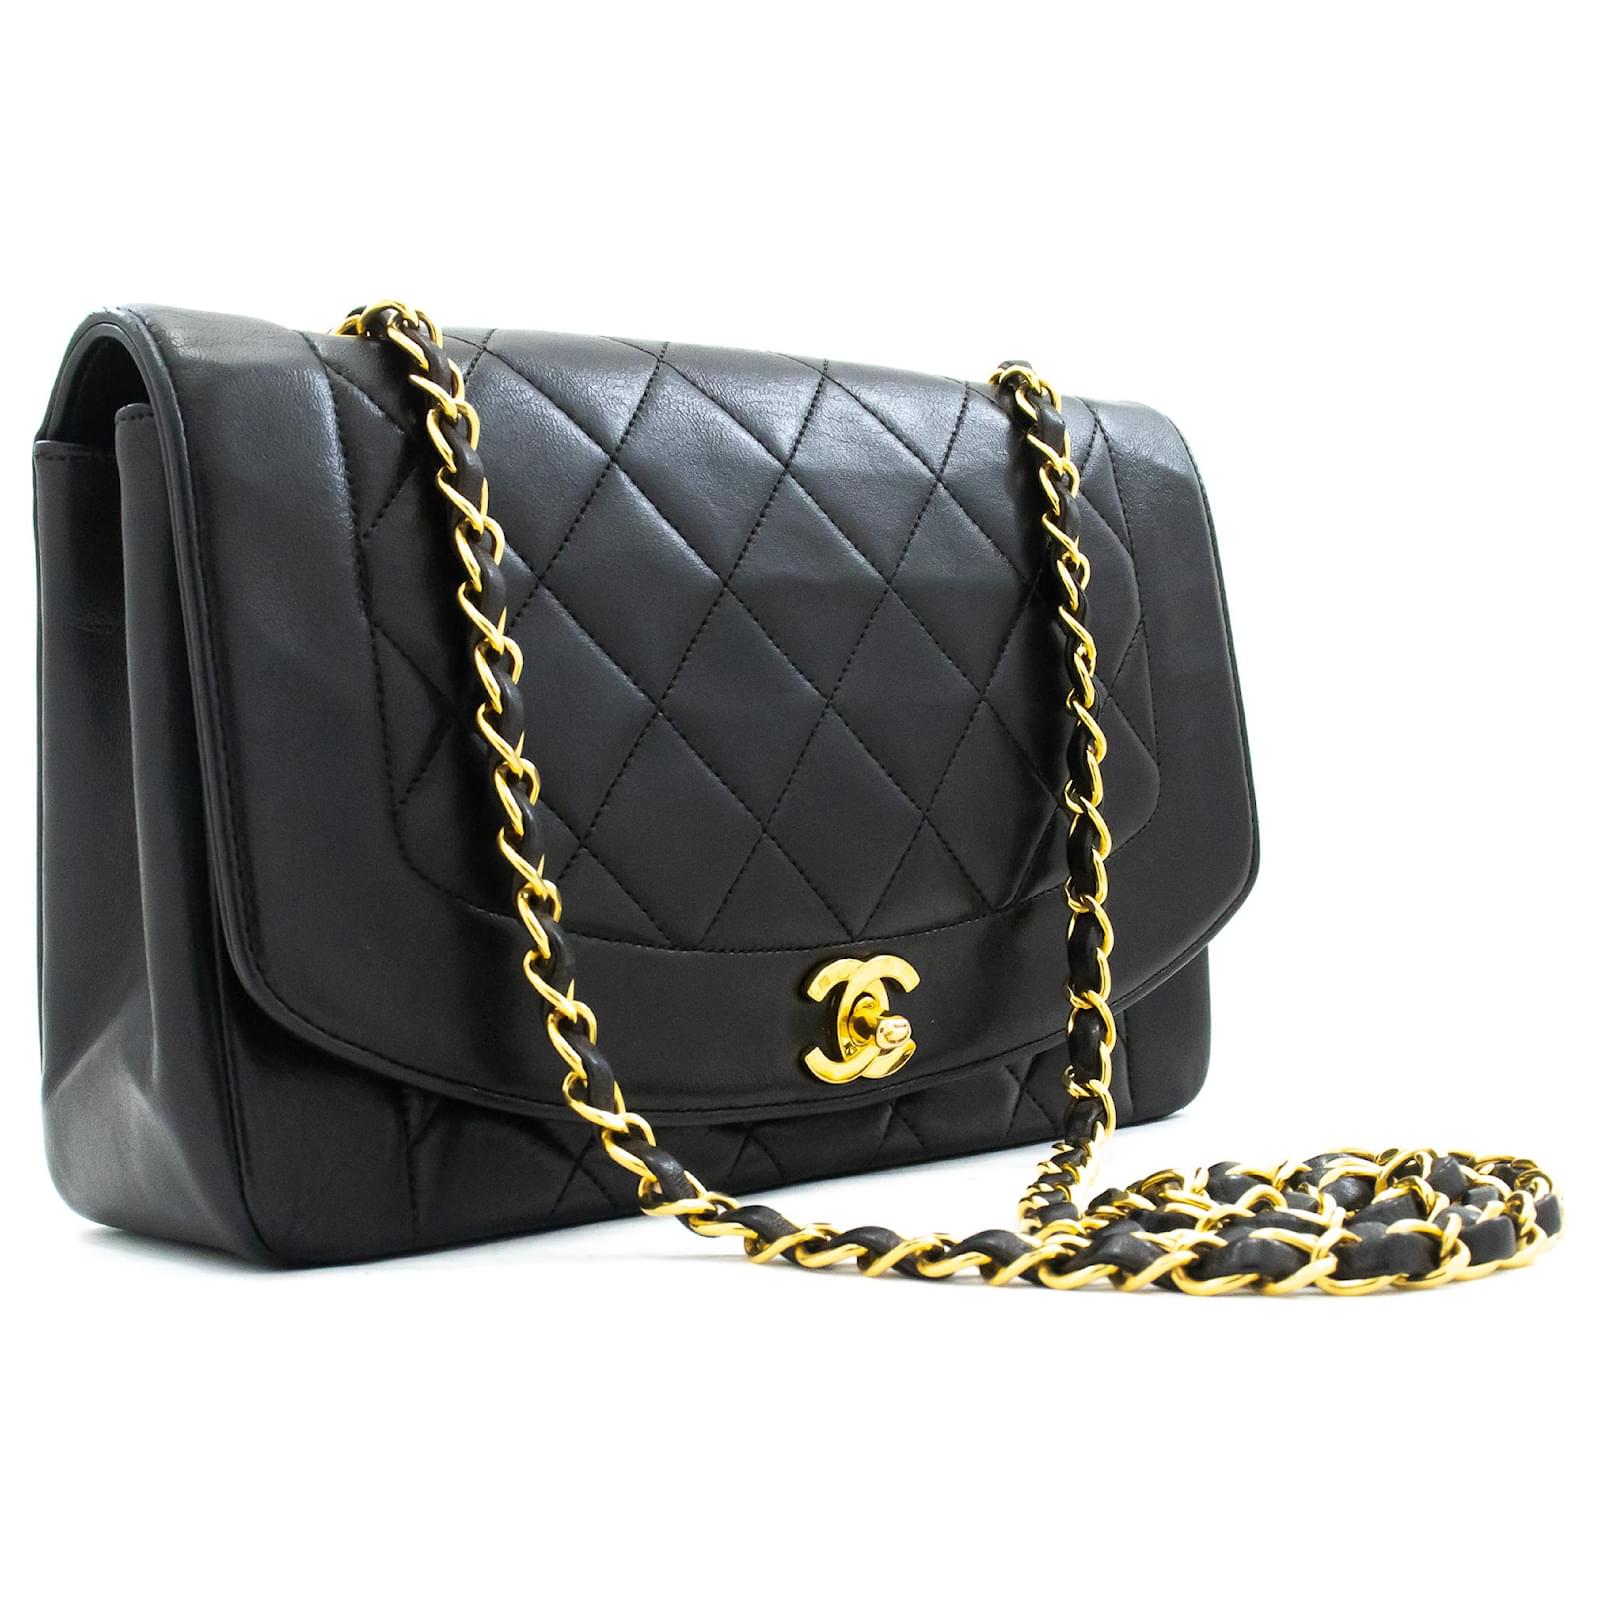 Chanel Diana Bag Complete Guide sizes materials prices  more  Luxe  Front